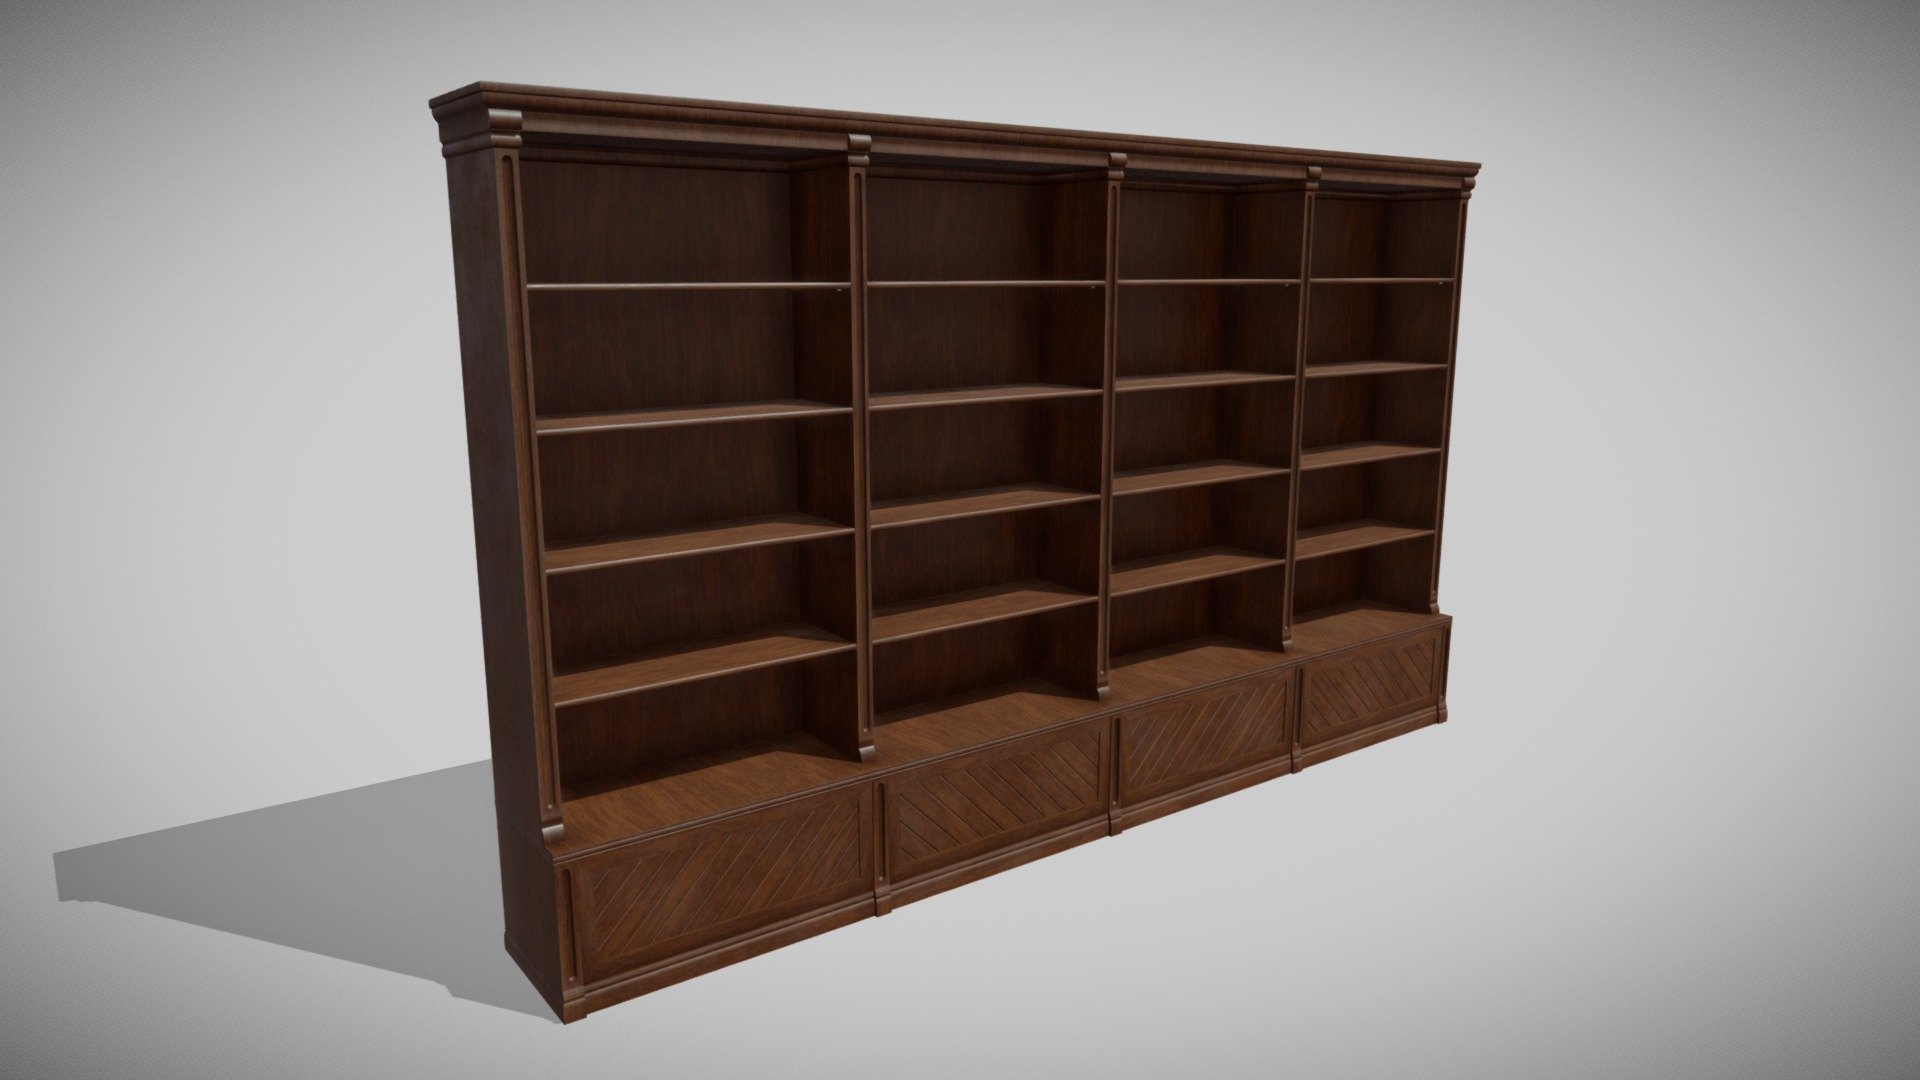 This is an old bookshelf. There are two materials (one for wood and the other for shelf holders) and three 4k textures (albedo, roughness and normal map). The model is game ready and high quality 3d model